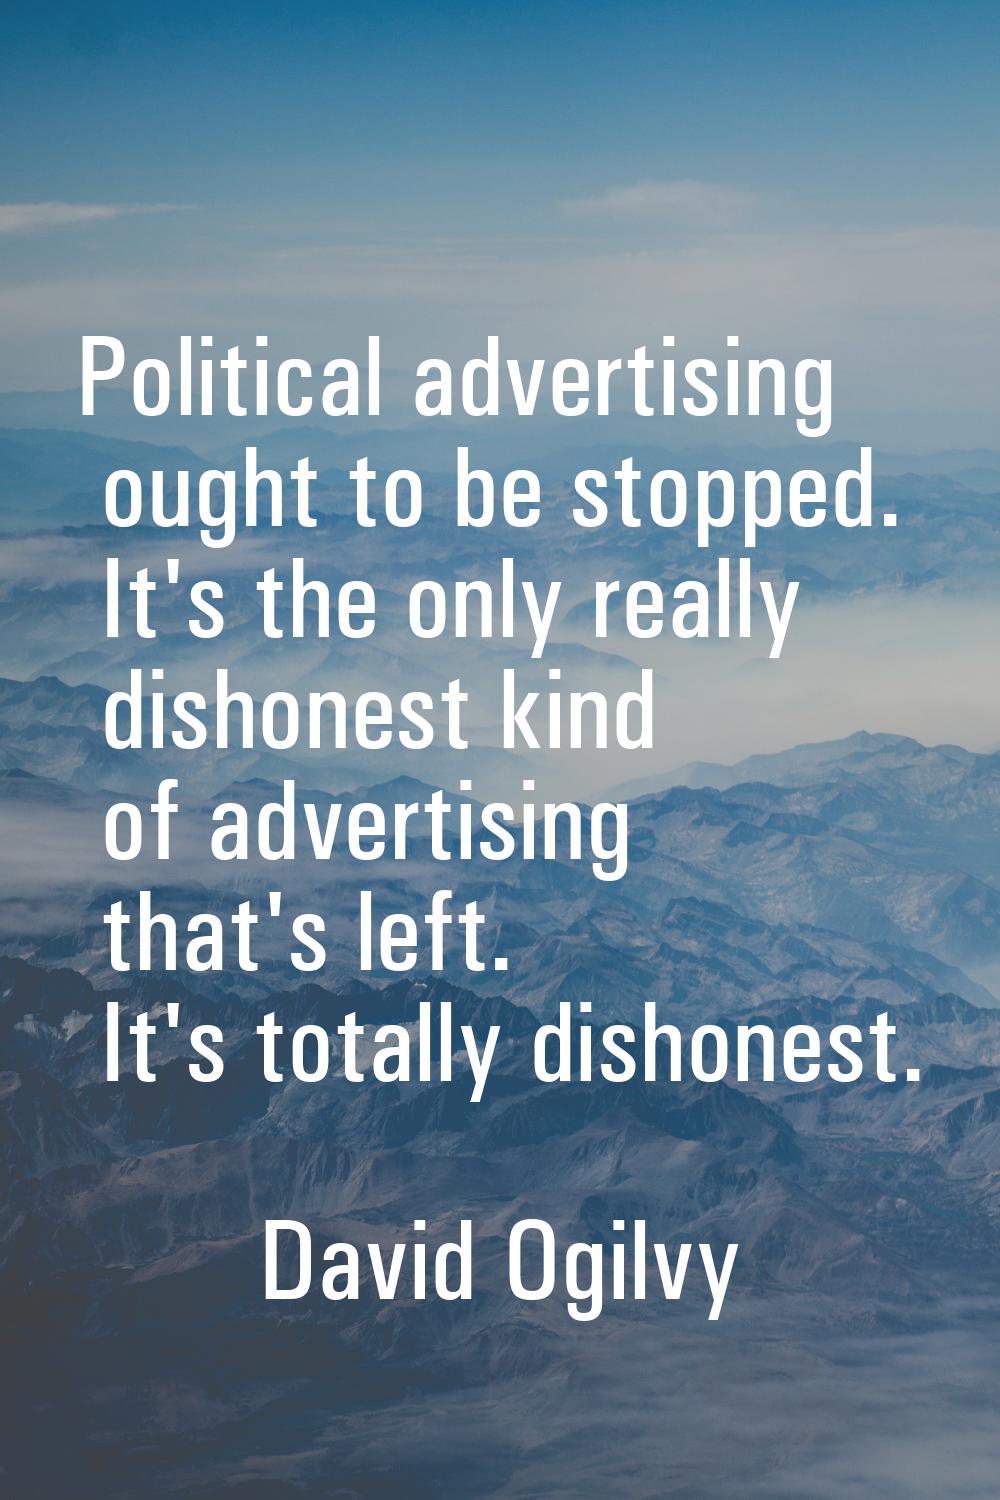 Political advertising ought to be stopped. It's the only really dishonest kind of advertising that'